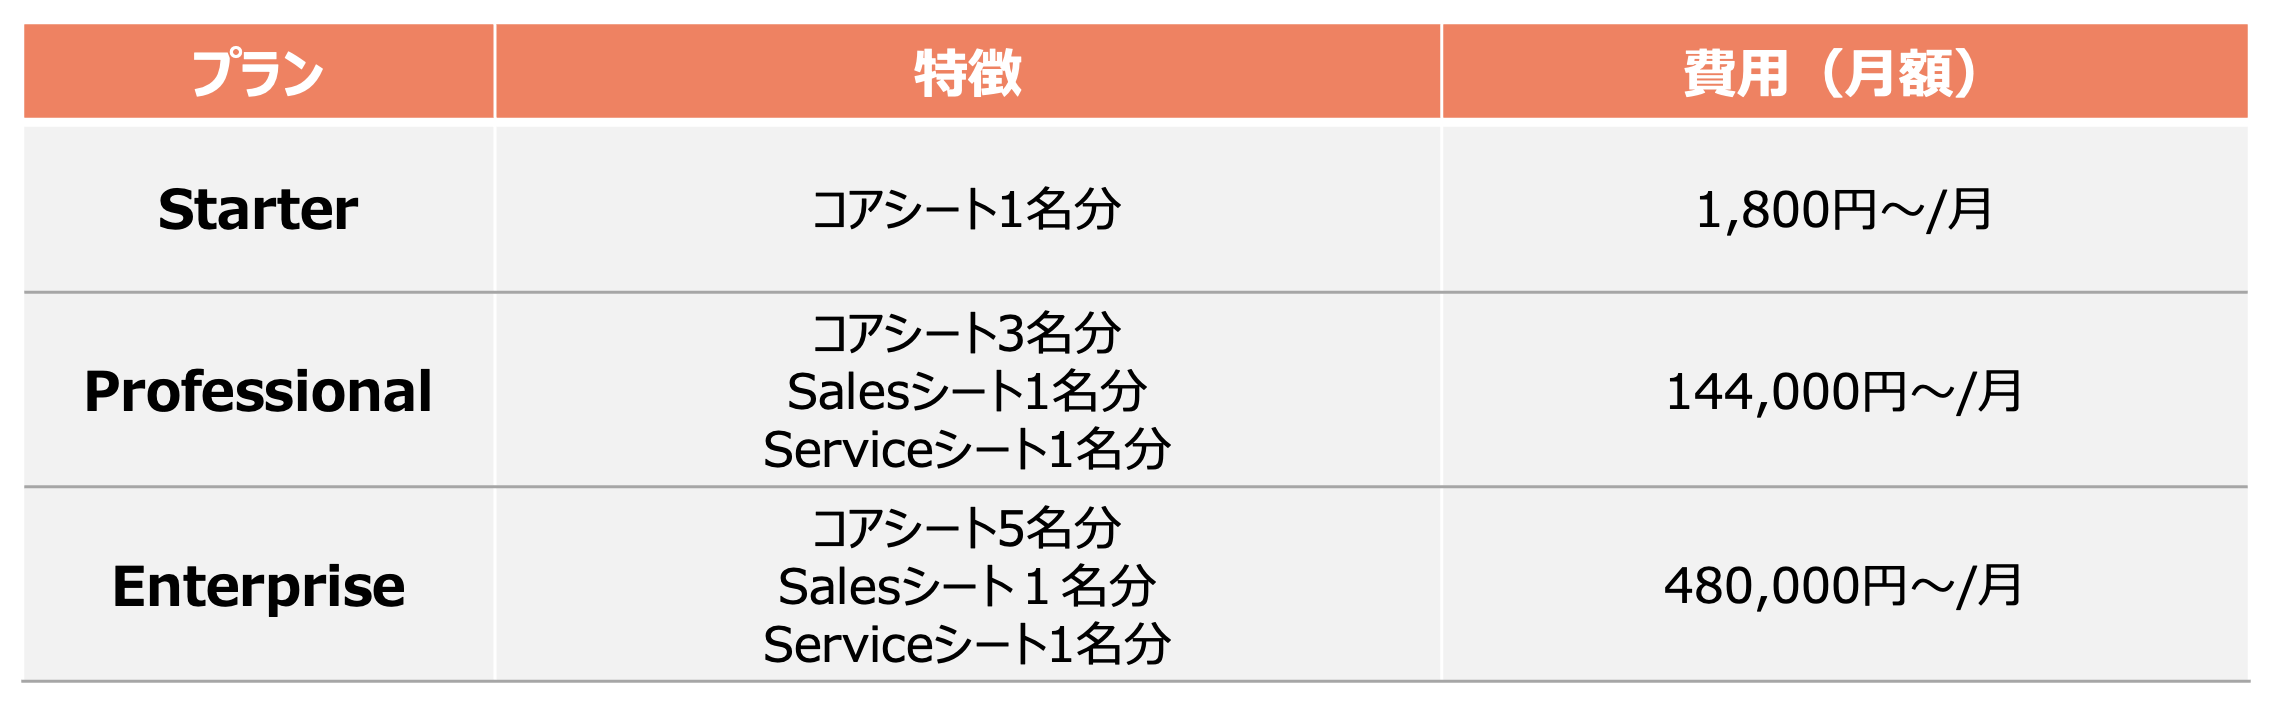 HubSpot CRM Suite料金プラン2024年3月更新